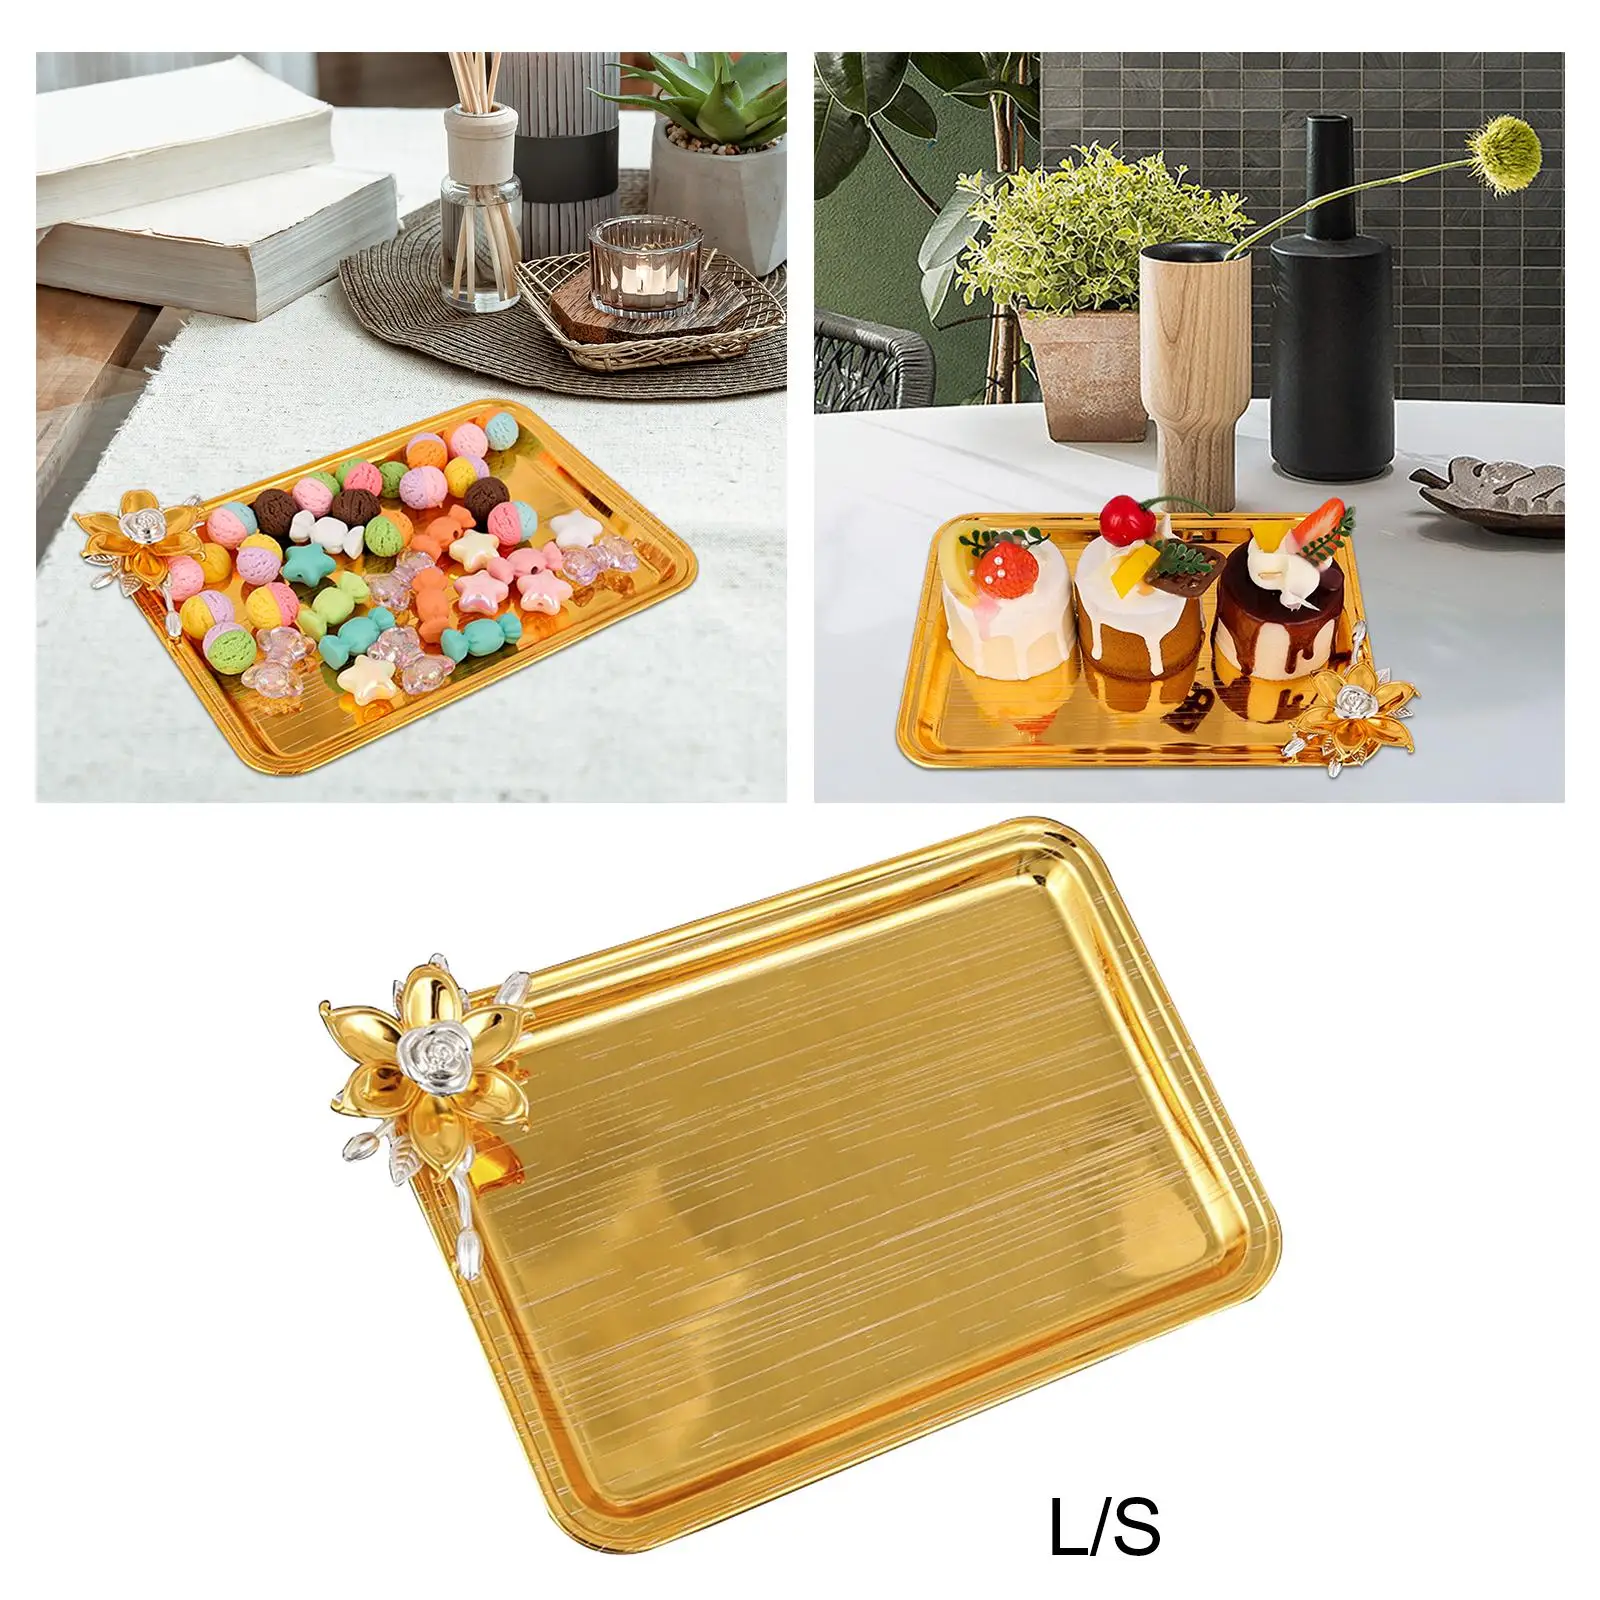 Snack Tray Photo Props Lightweight Durable Multifunctional Decorative Tray Metal Tray for Countertop Party Desk Kitchen Beverage